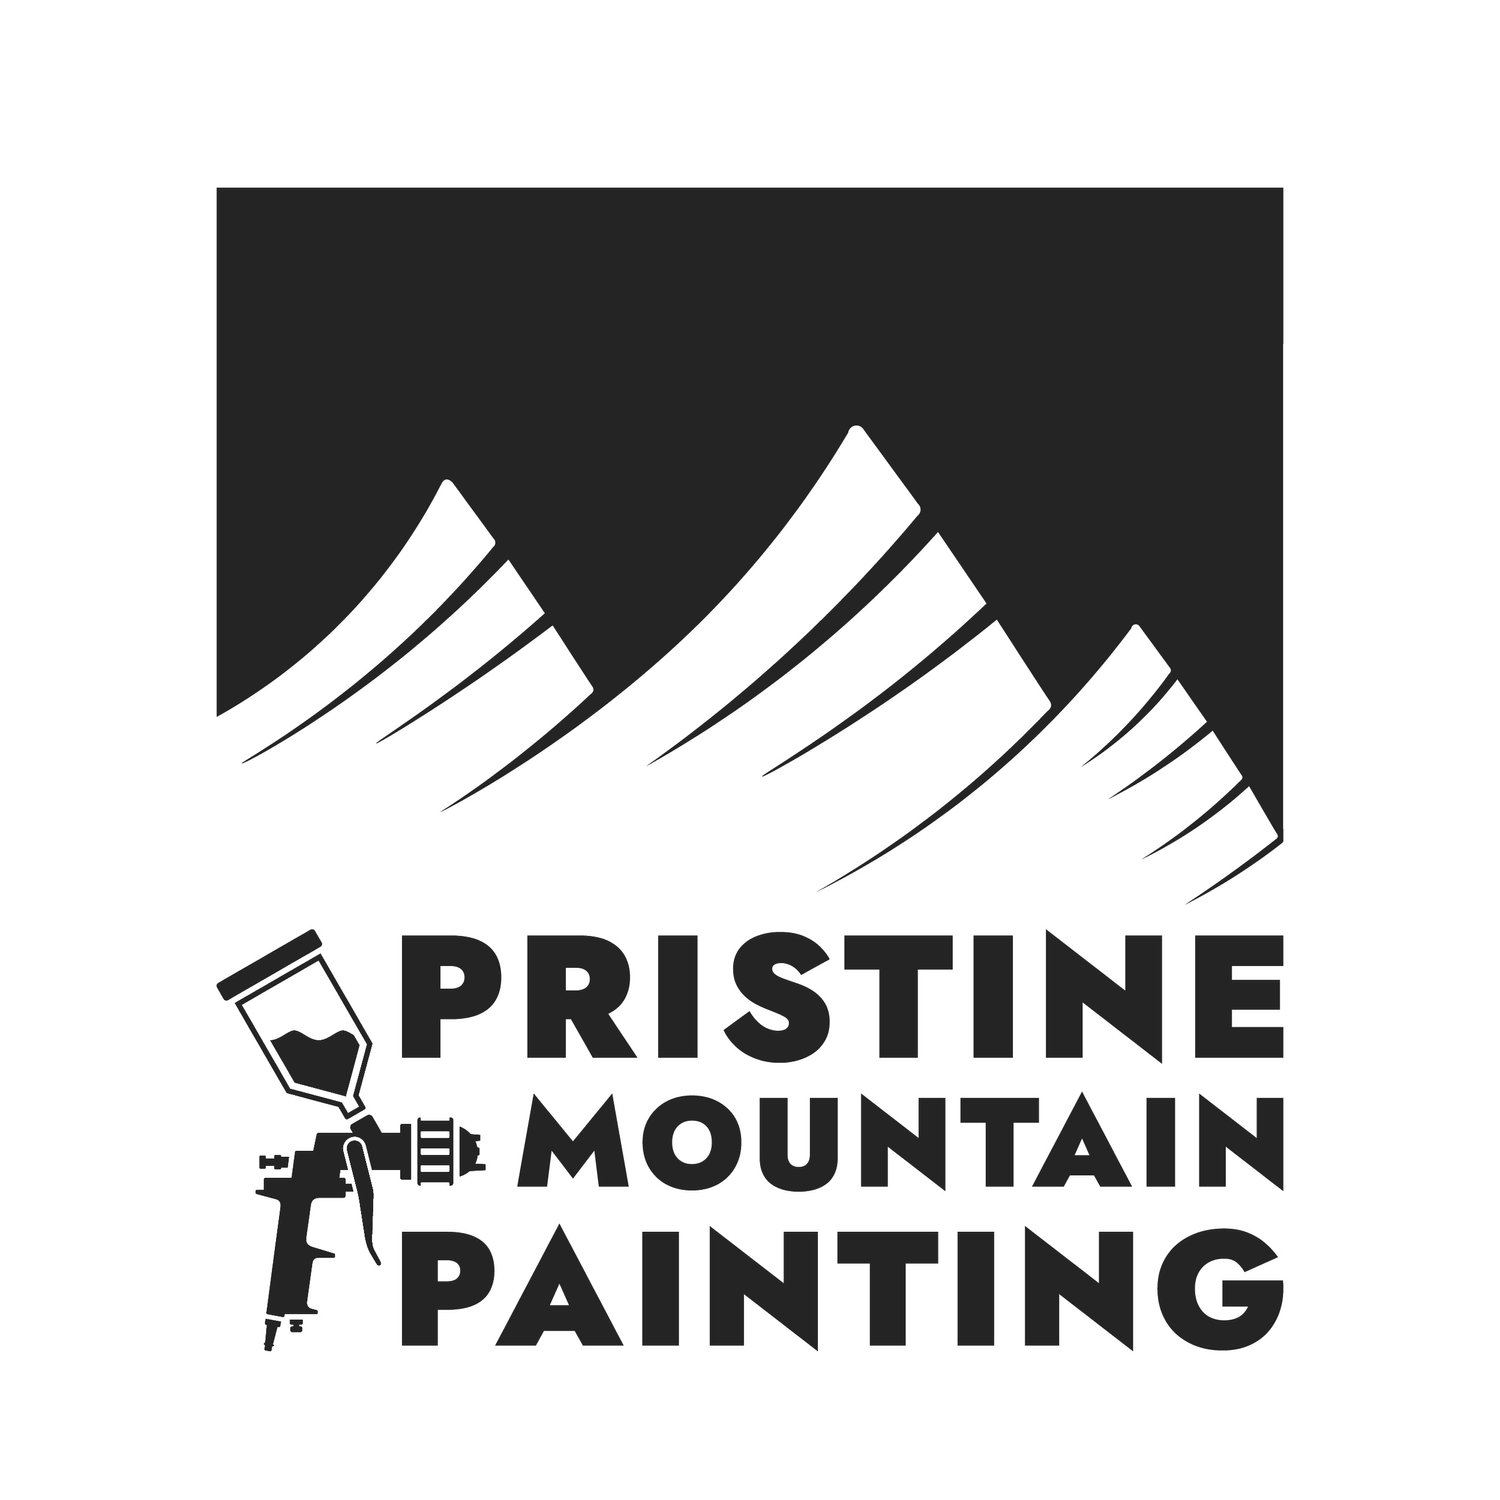 Pristine Mountain Painting: Cabinet Painting For Denver Metro